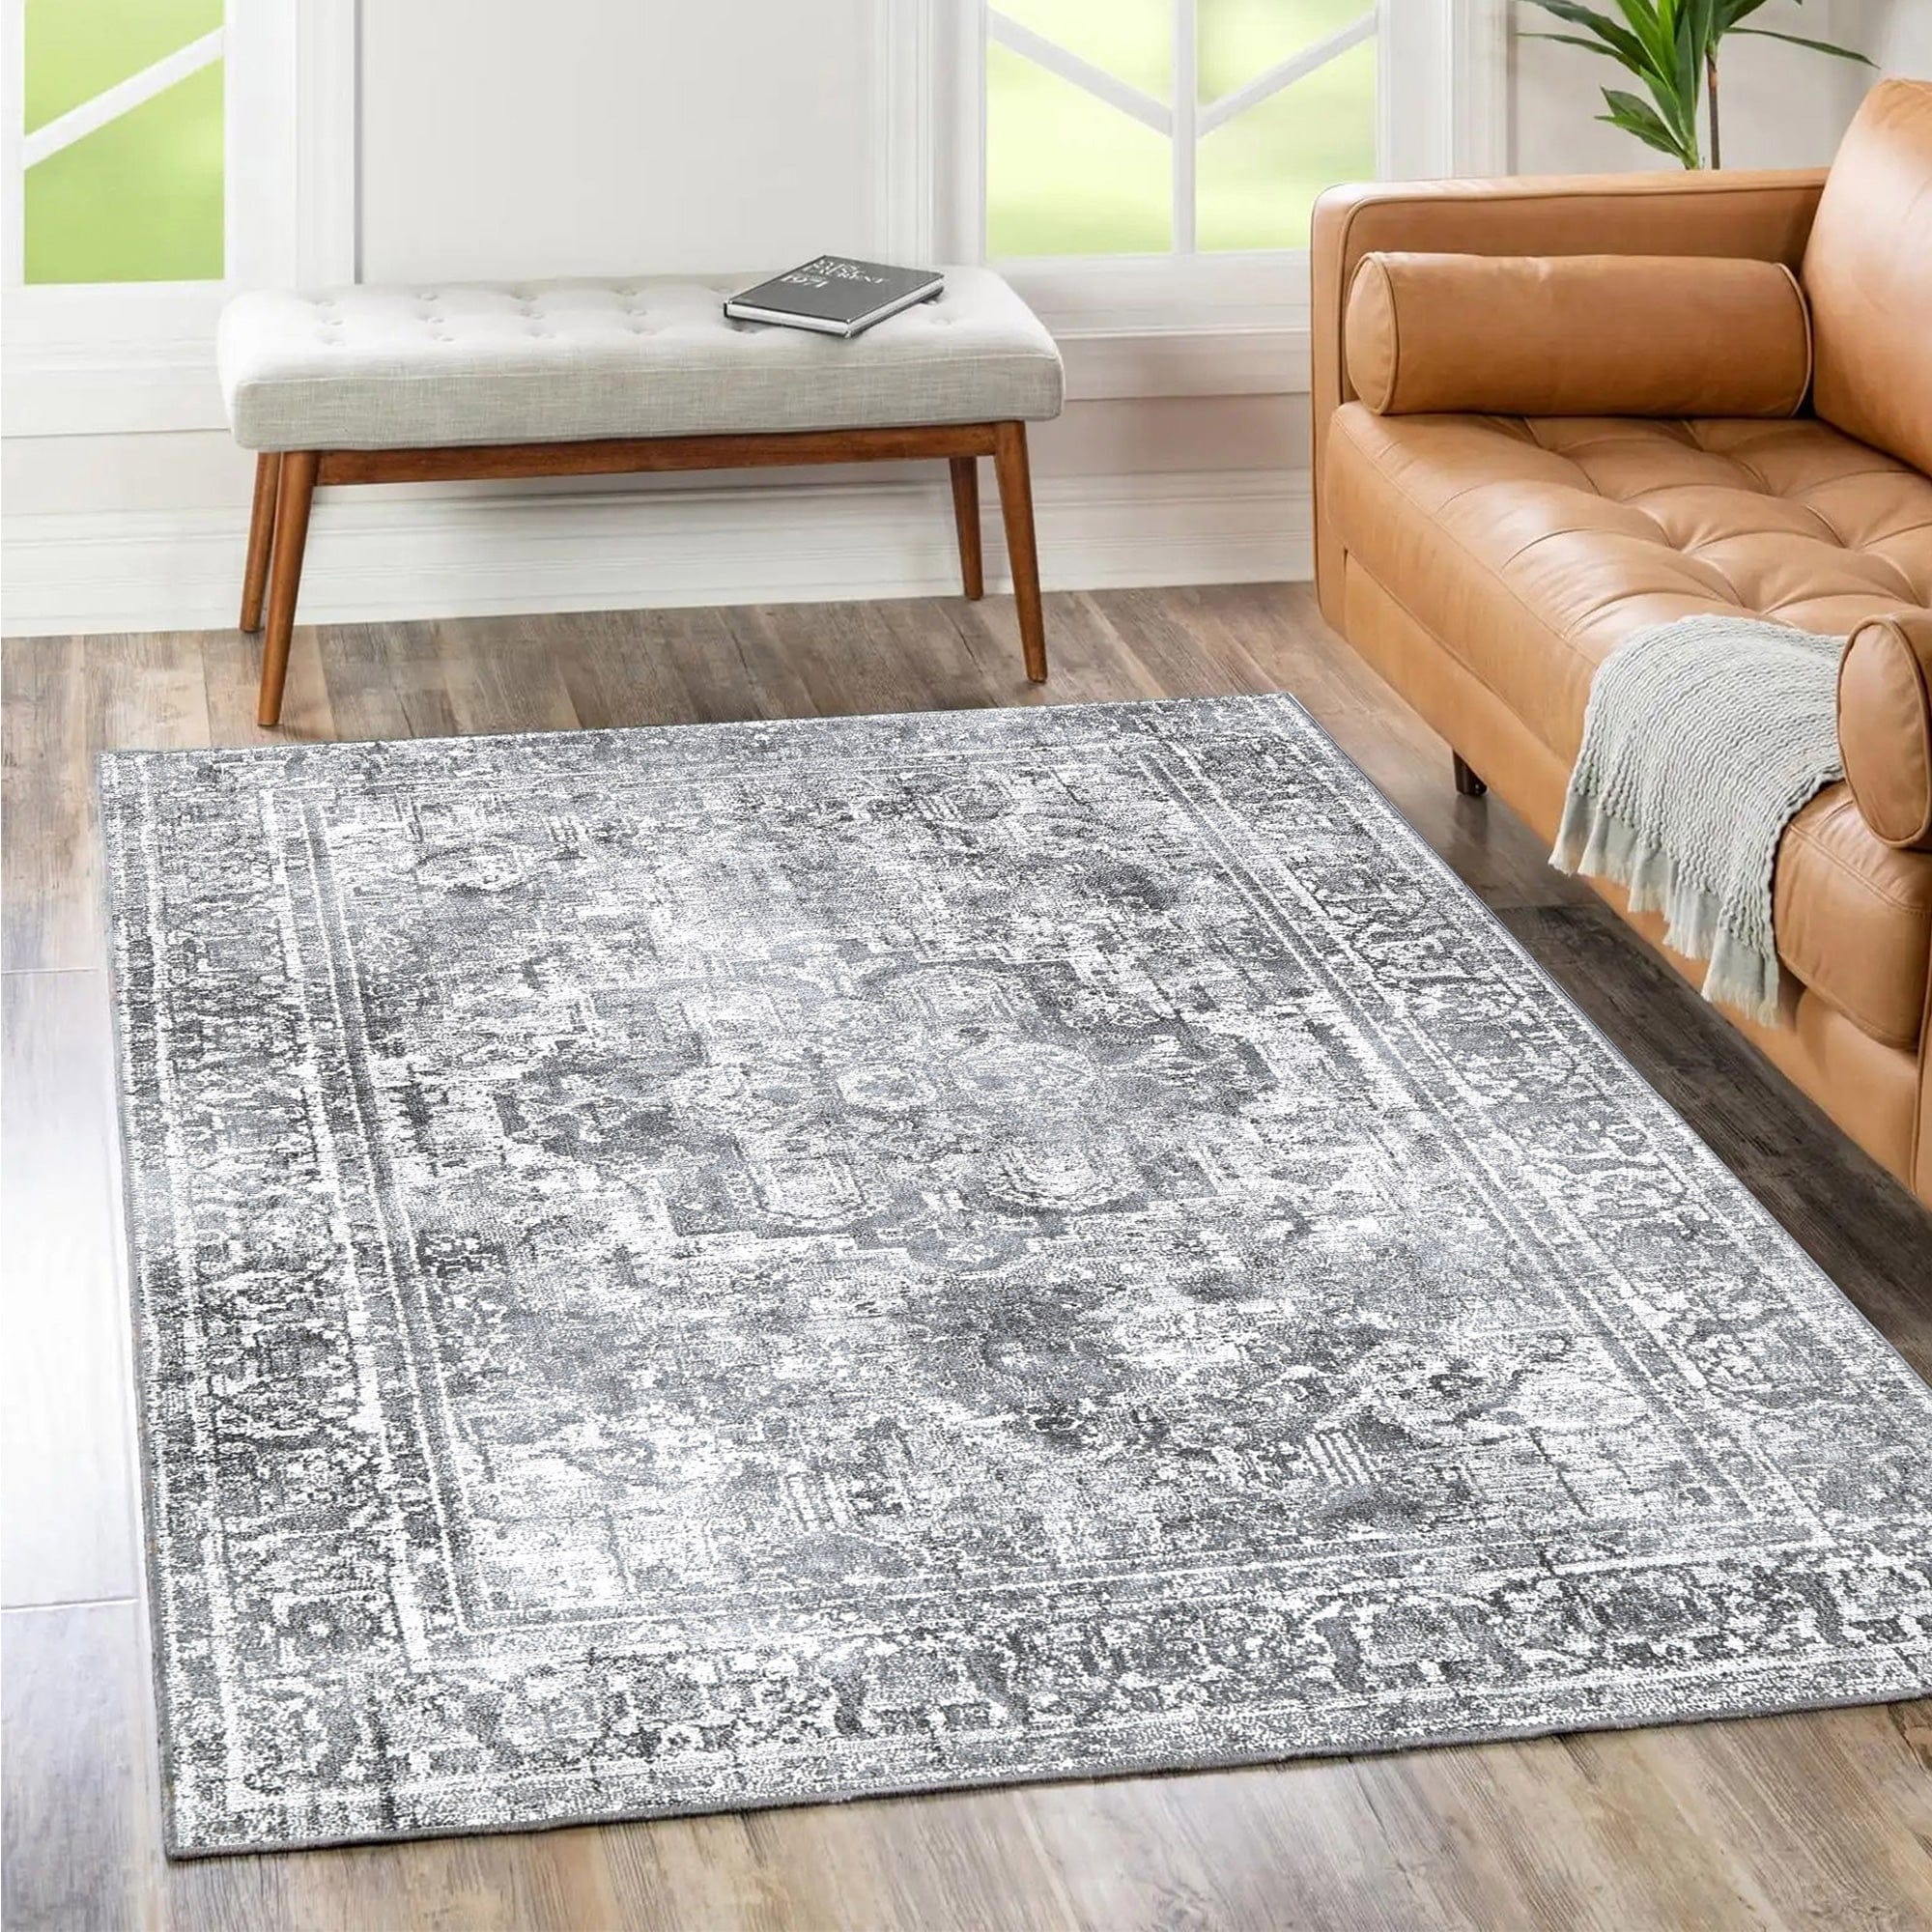 https://ak1.ostkcdn.com/images/products/is/images/direct/426f0c091c15e1cf8fb15b62733201fdeb294942/The-Rug-Collective-Distressed-Vintage-Chilaz-Grey-Rug-Machine-Washable-Area-Rug.jpg